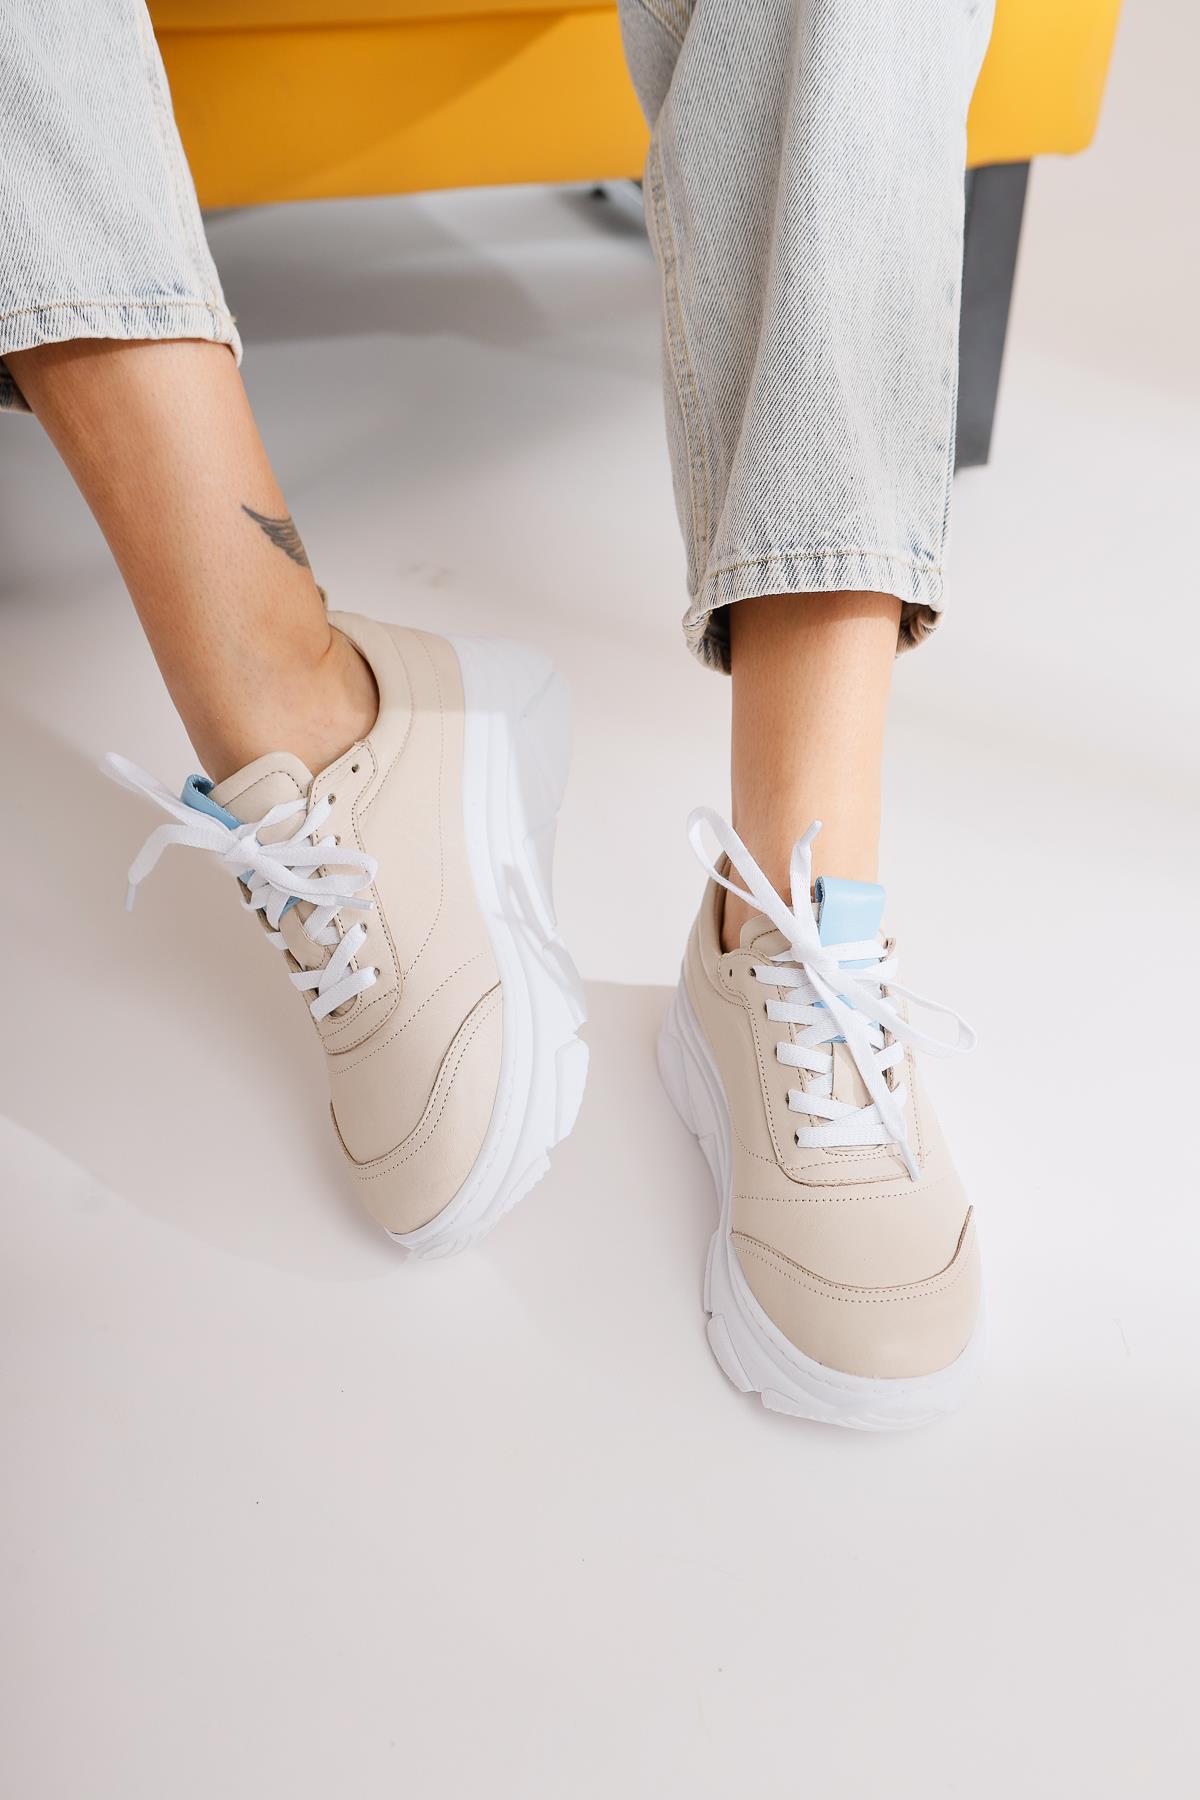 Genuine Leather Chika Beige Nude Sneakers Sports Shoes